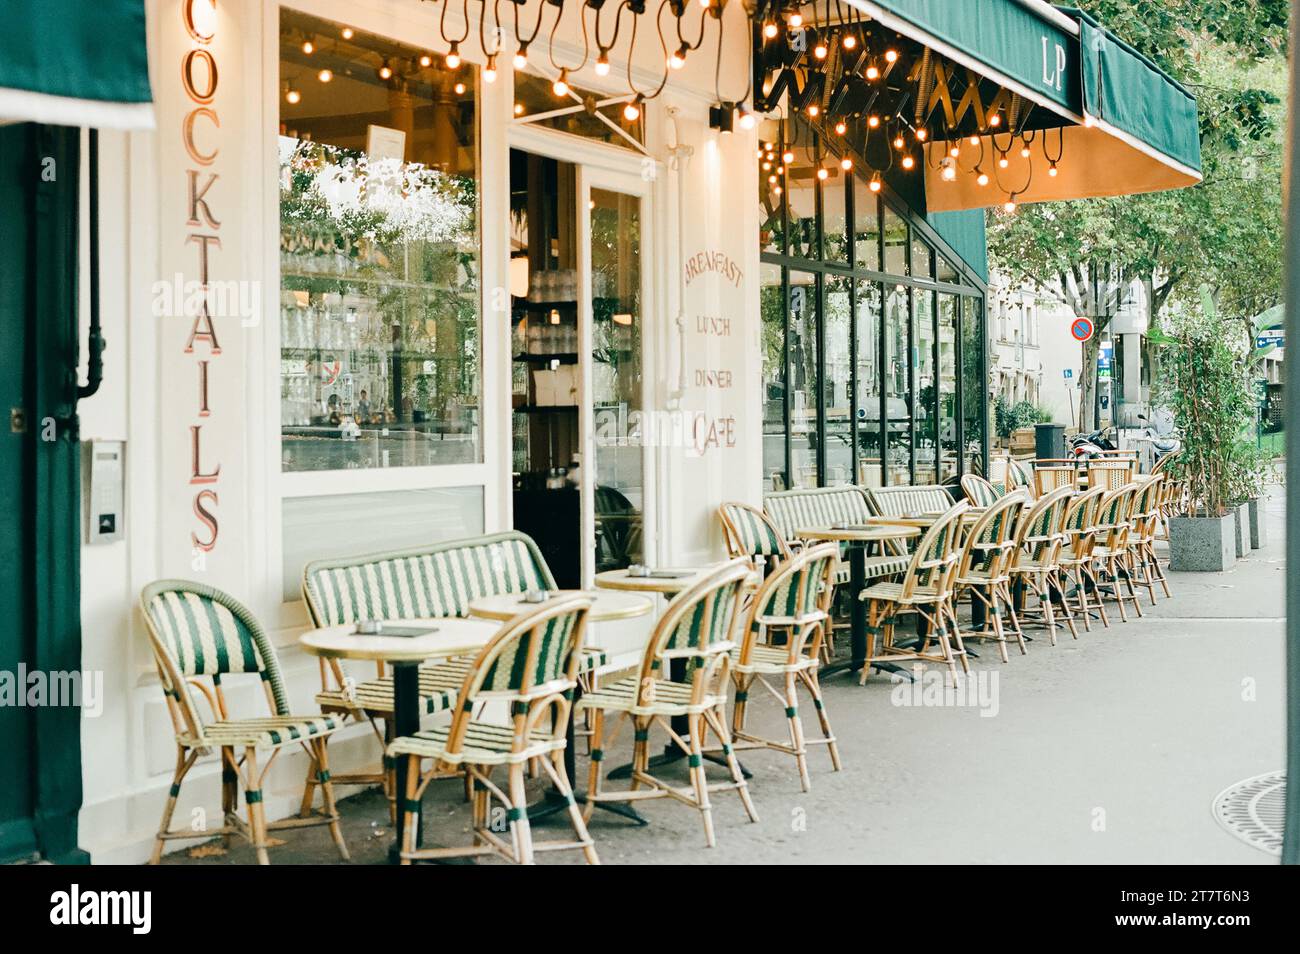 Paris cafe with green awning and beautiful lights Stock Photo